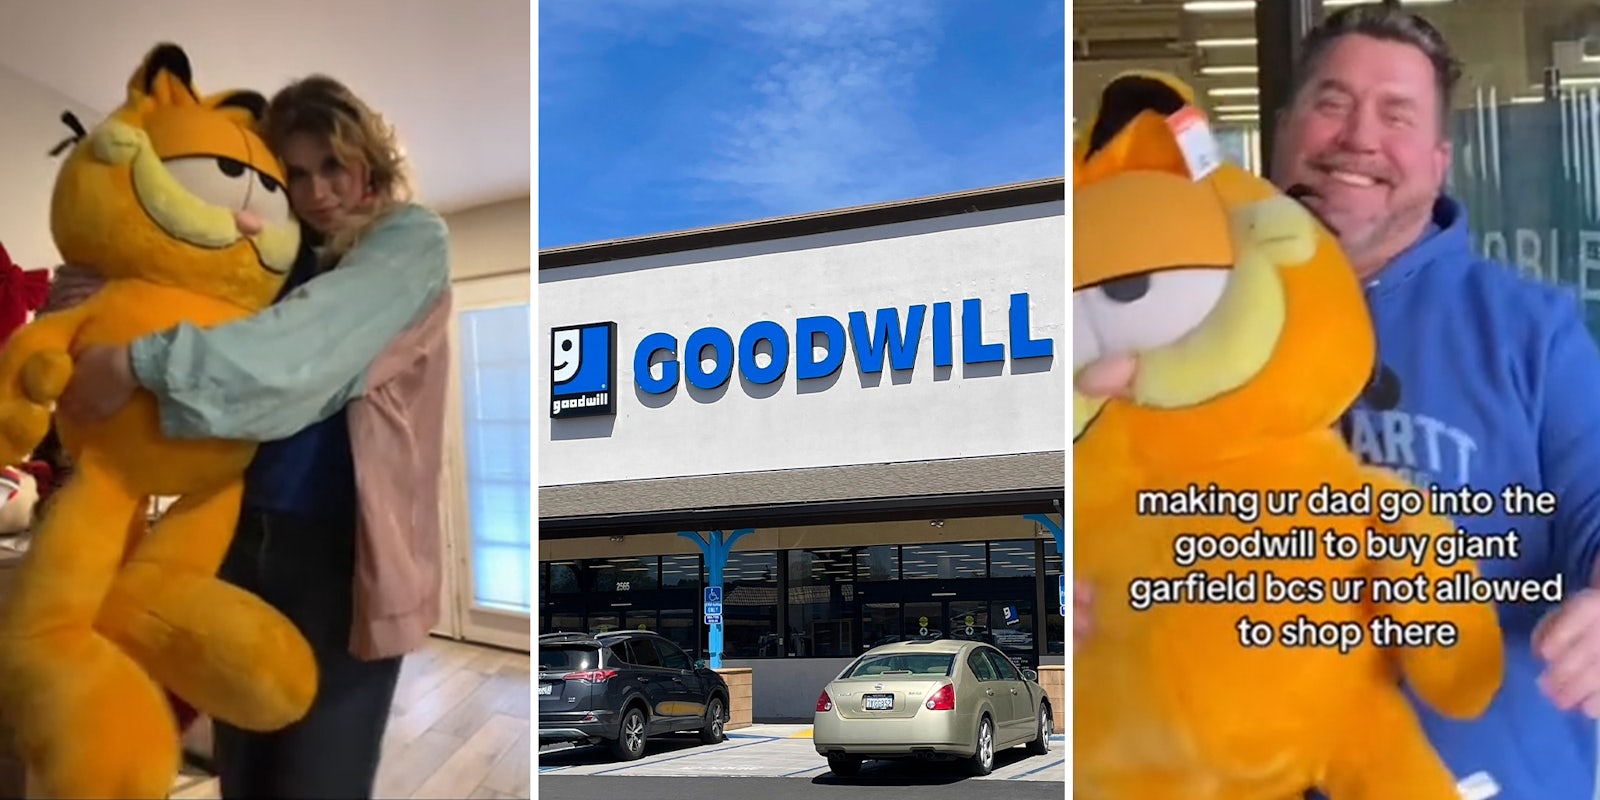 Goodwill worker fired after circumventing no shopping policy to buy giant Garfield